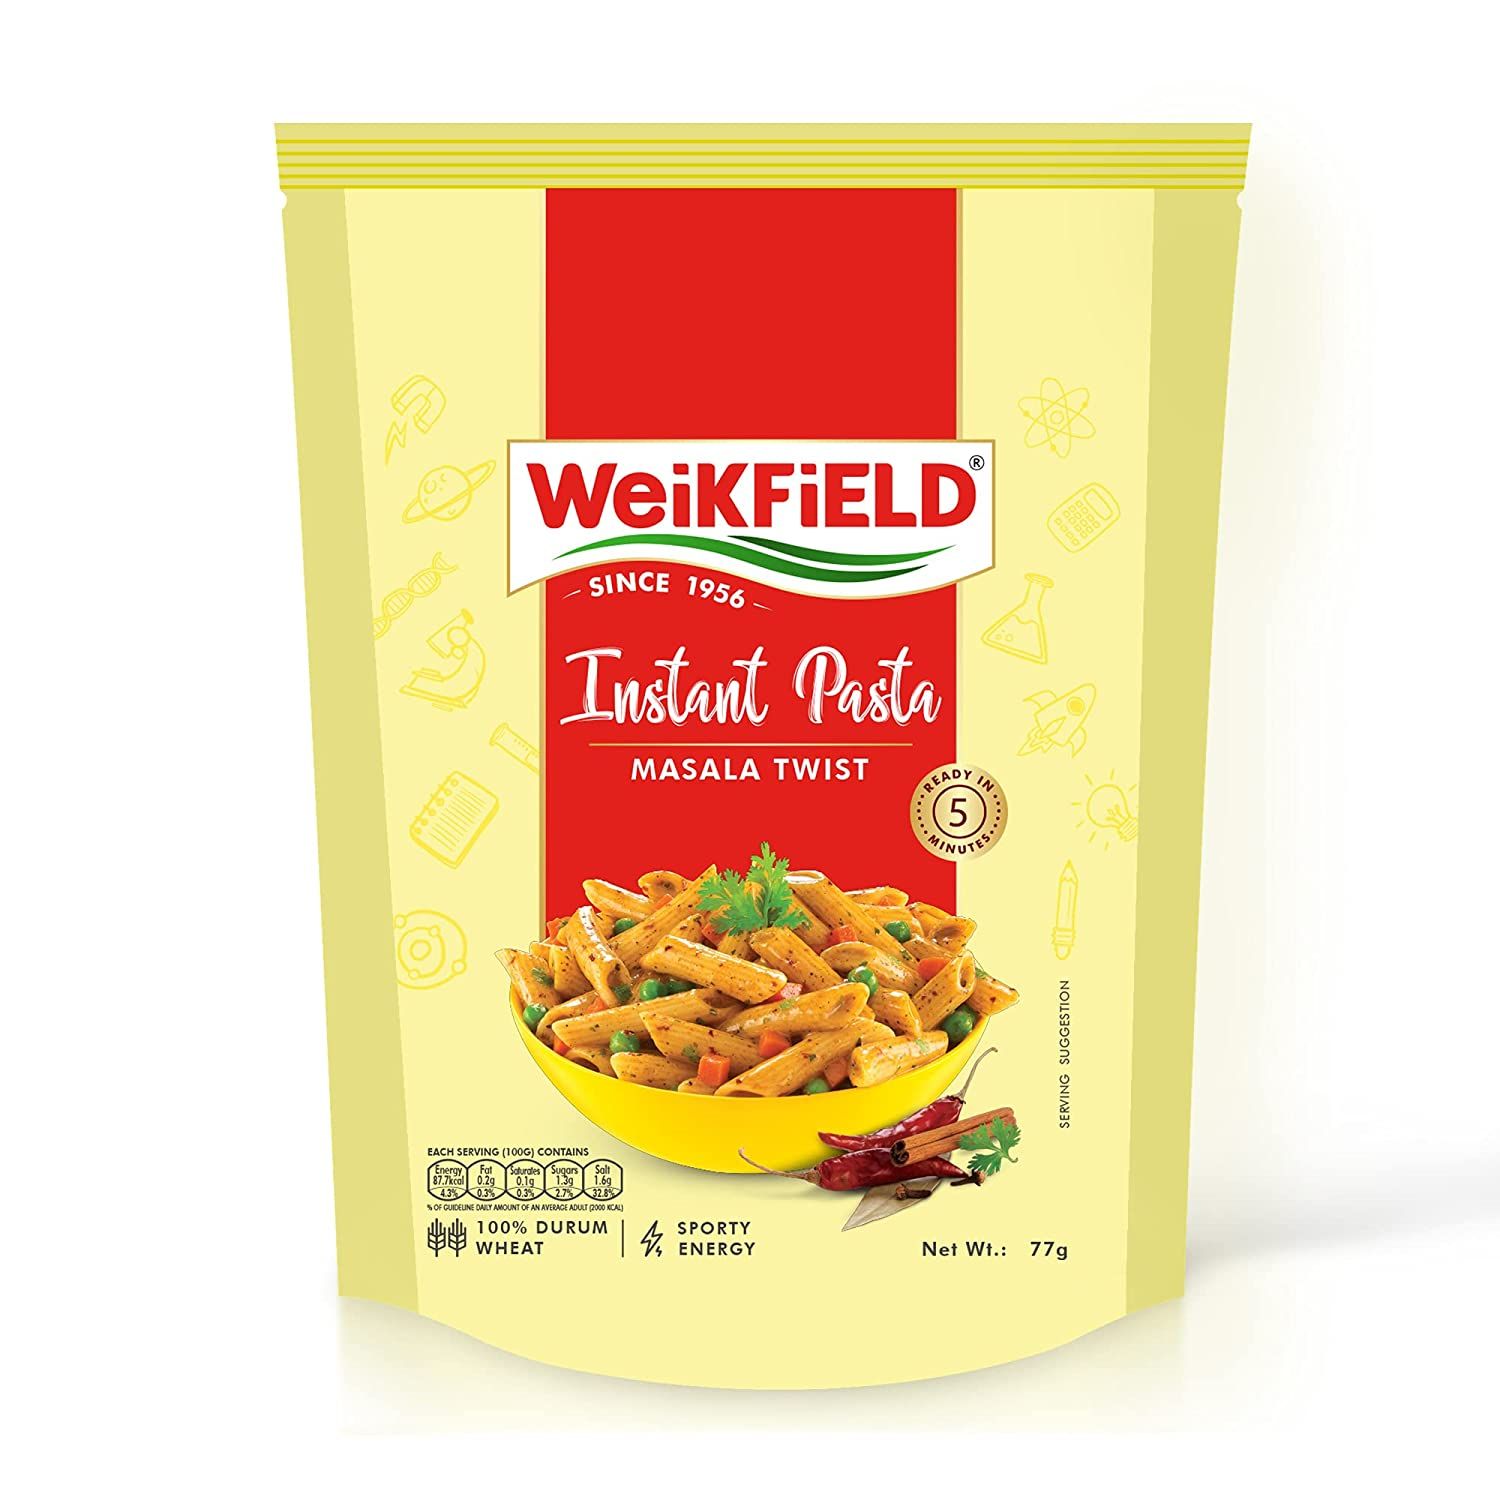 Weikfield Instant Pasta Masala Mix Image